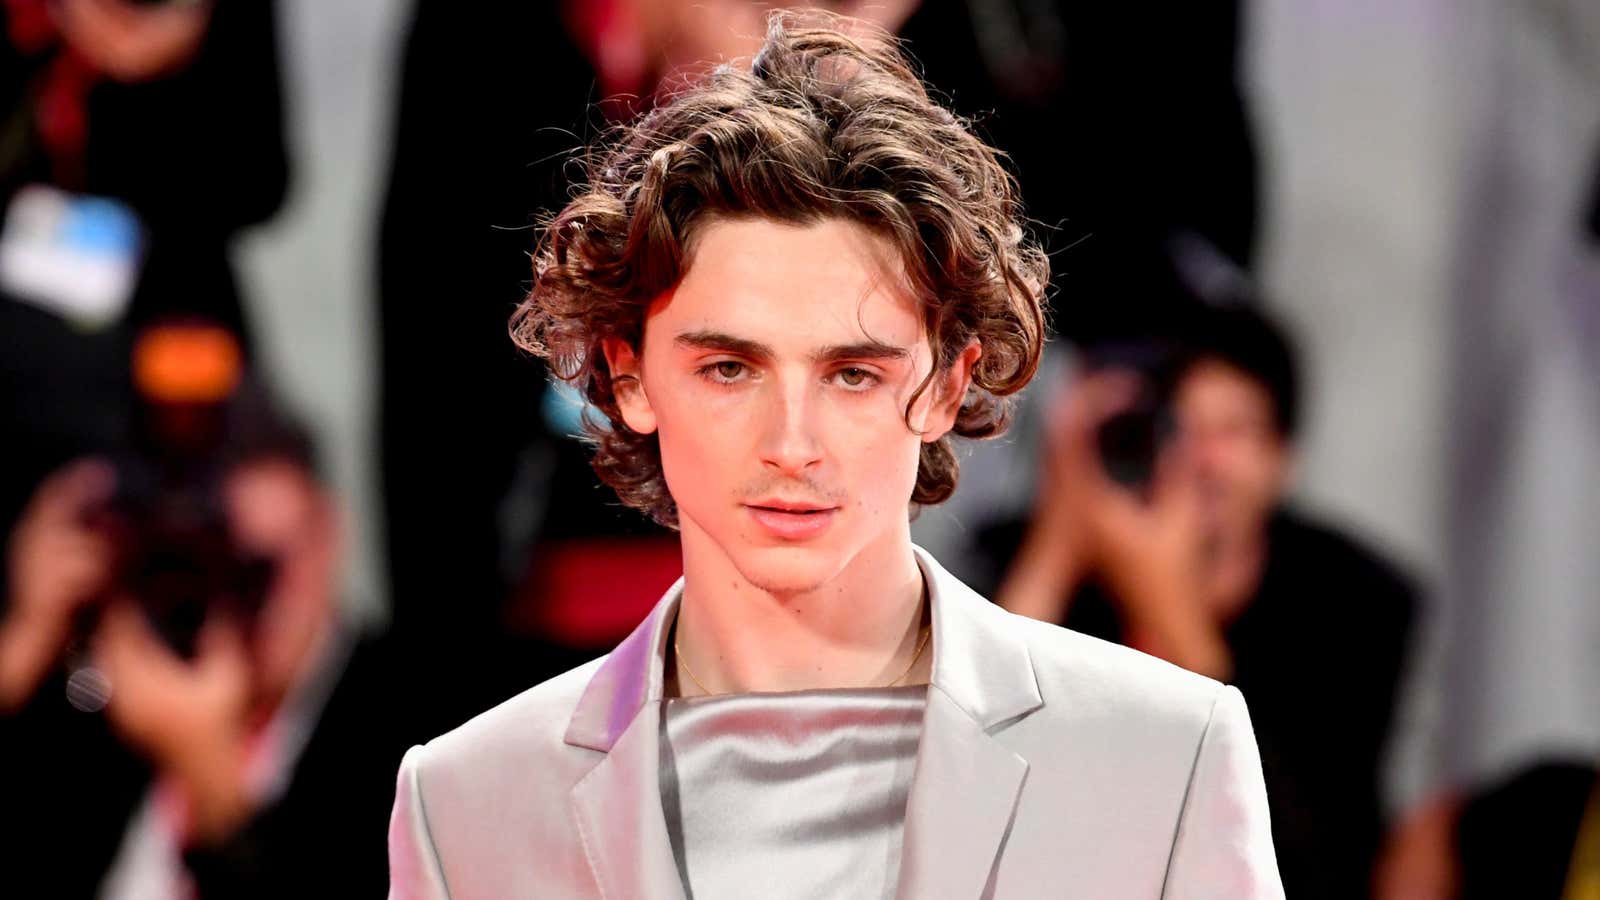 Timothee Chalamet, redefining the Hollywood male sex symbol.